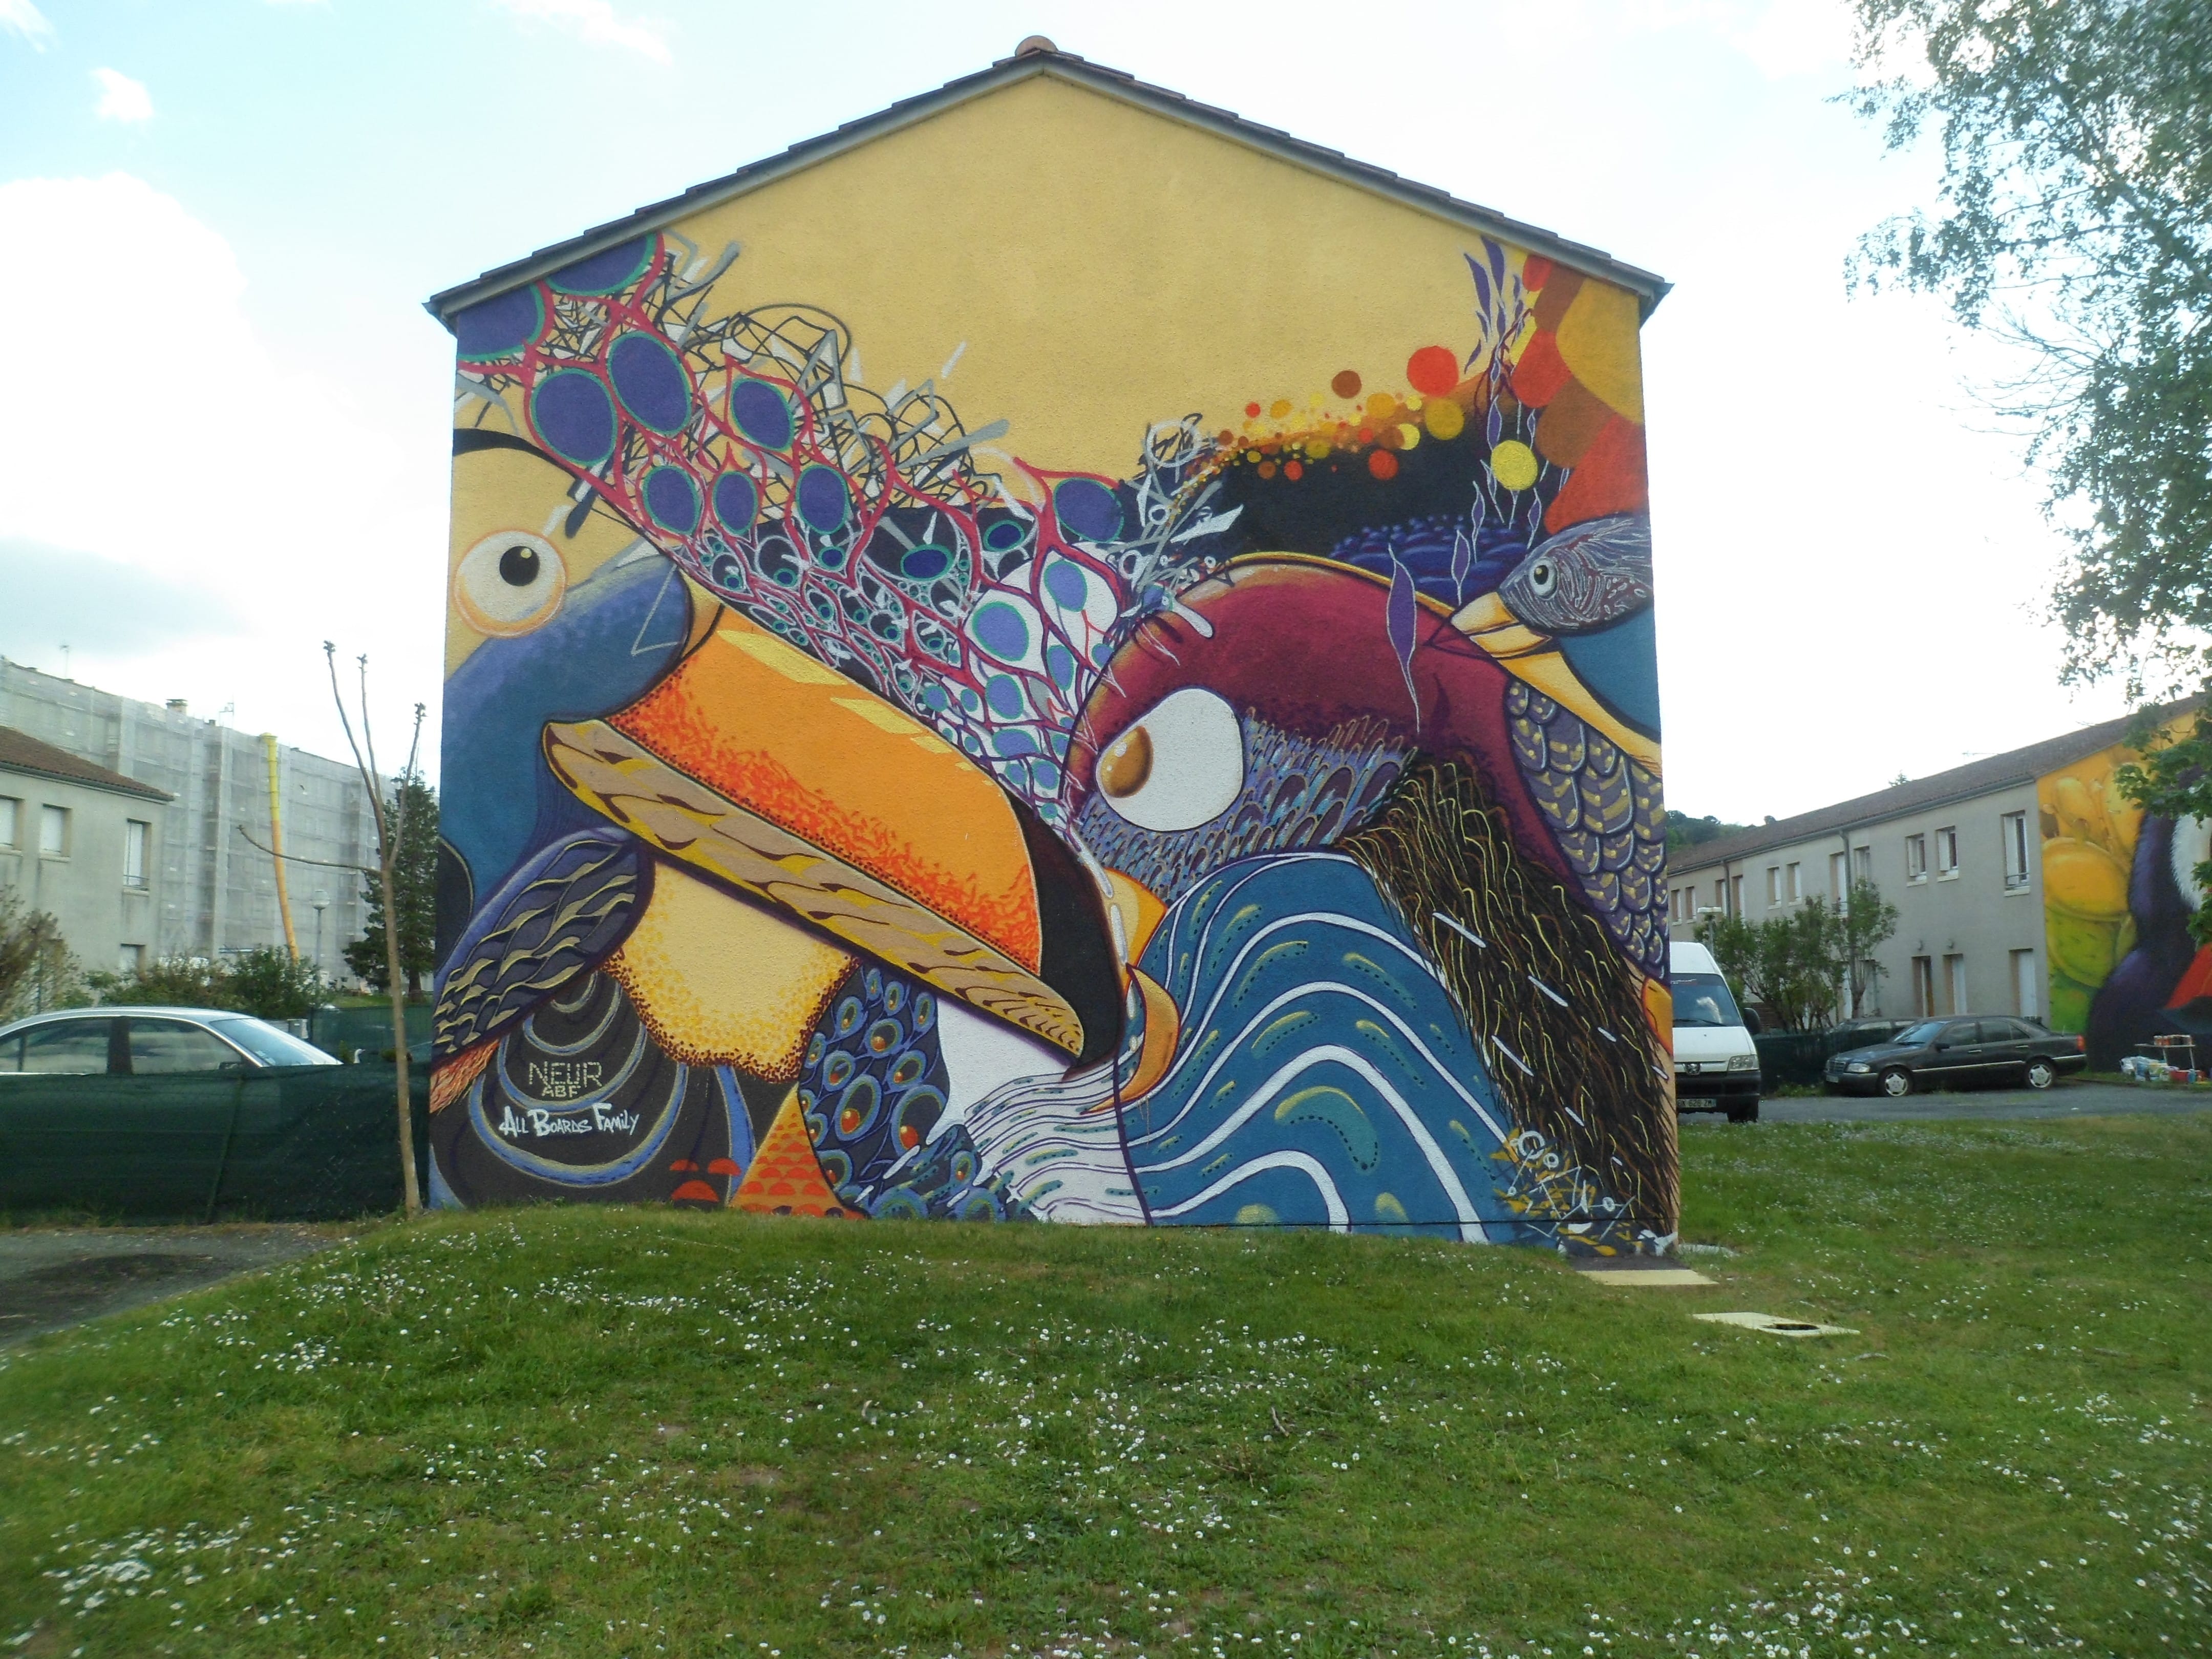 Graffiti 5664 #neurabf captured by Neur Abf in Coulounieix-Chamiers France